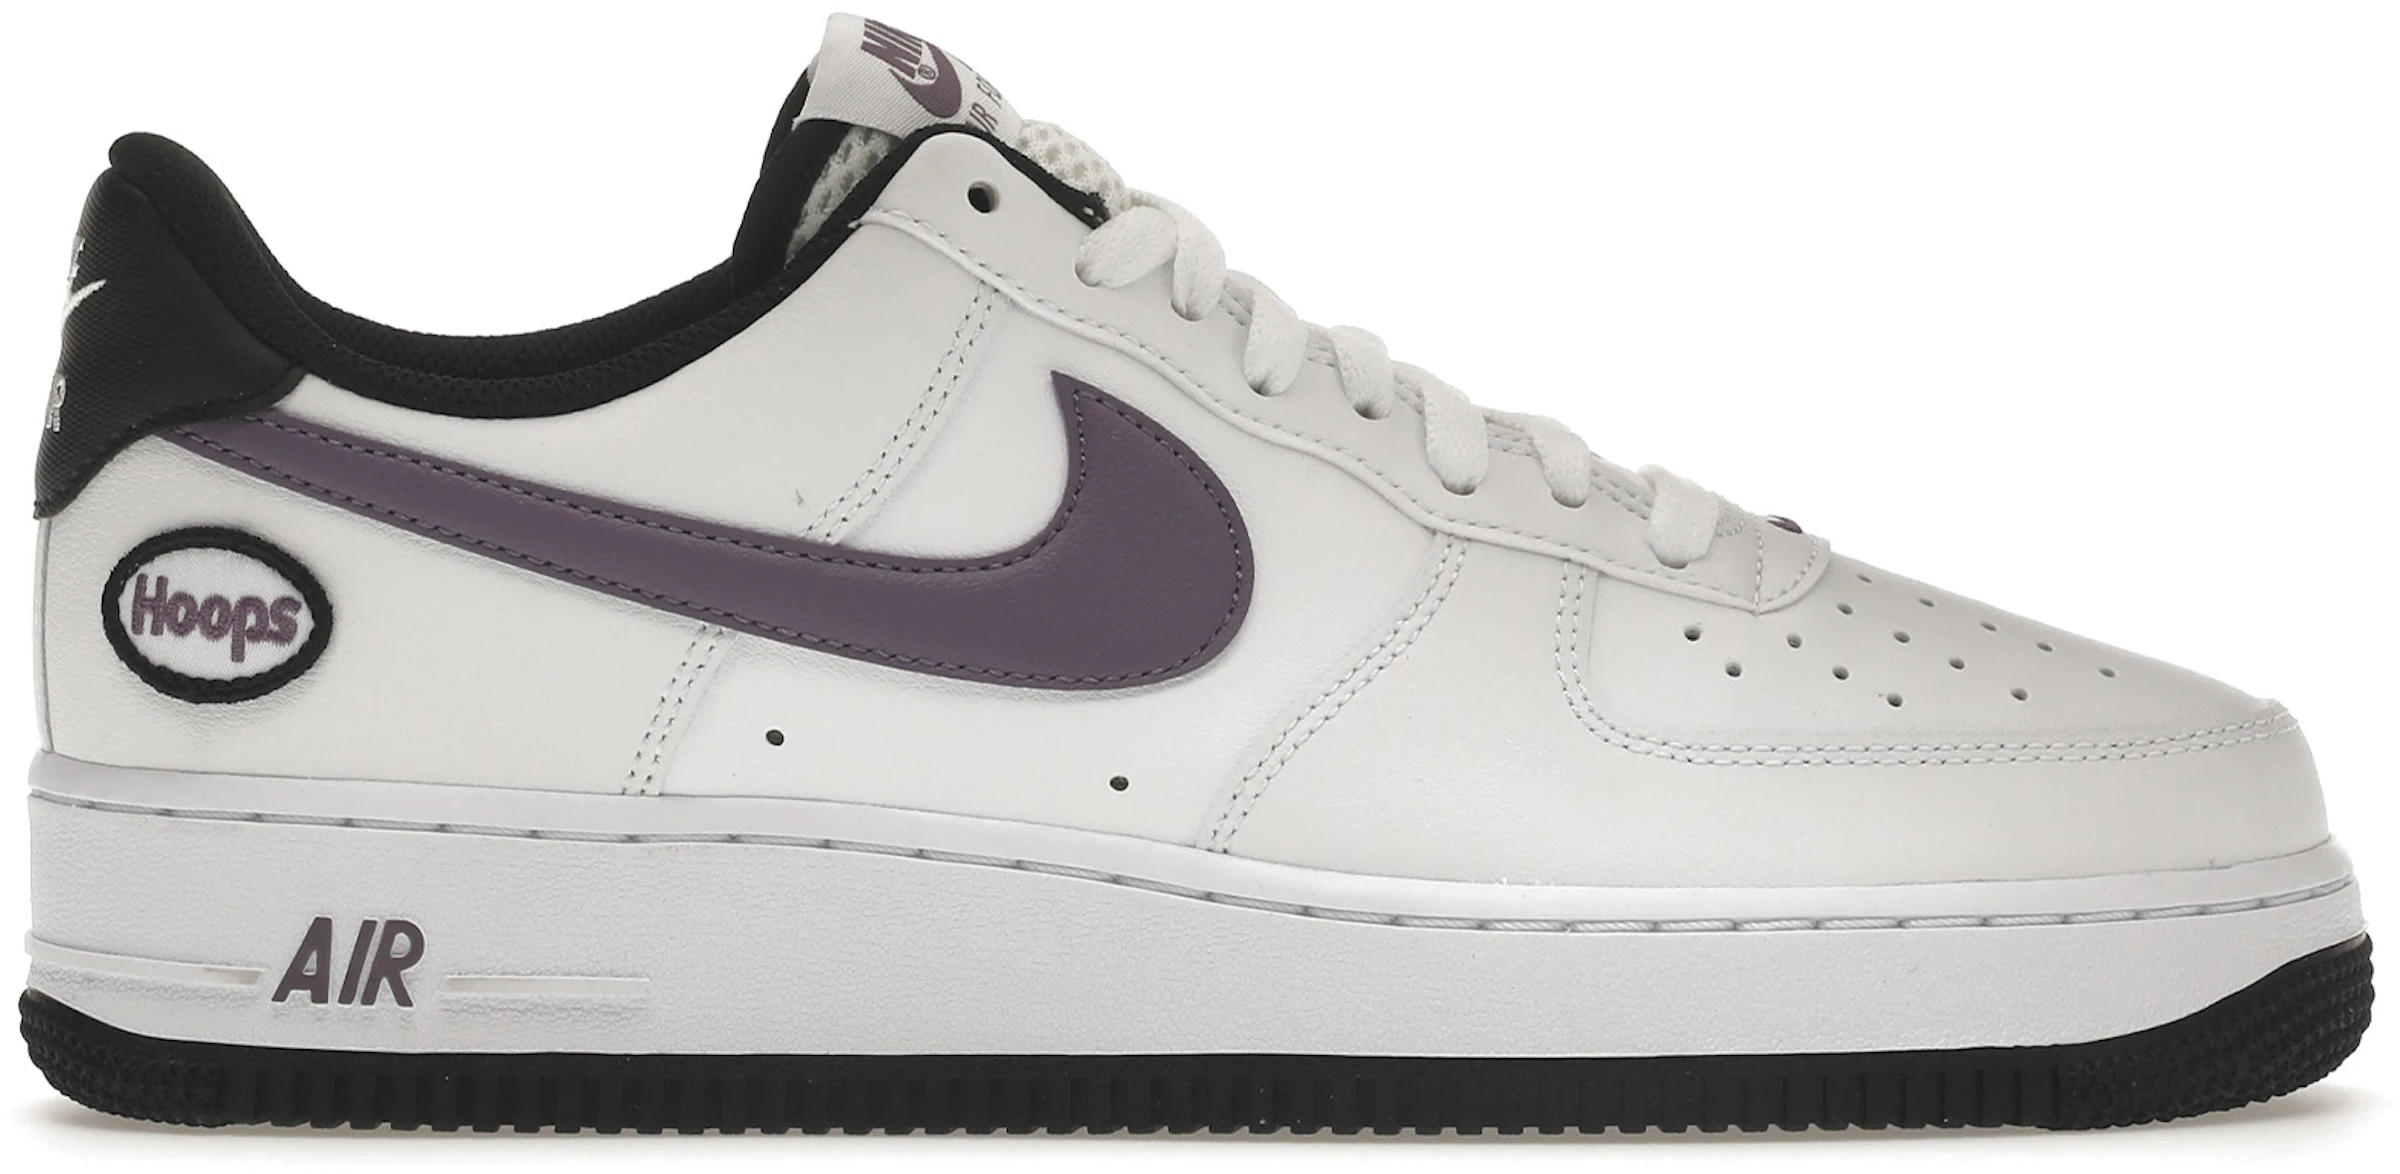 Air Force 1 Low Hoops White Canyon Purple - DH7440-100 - ES